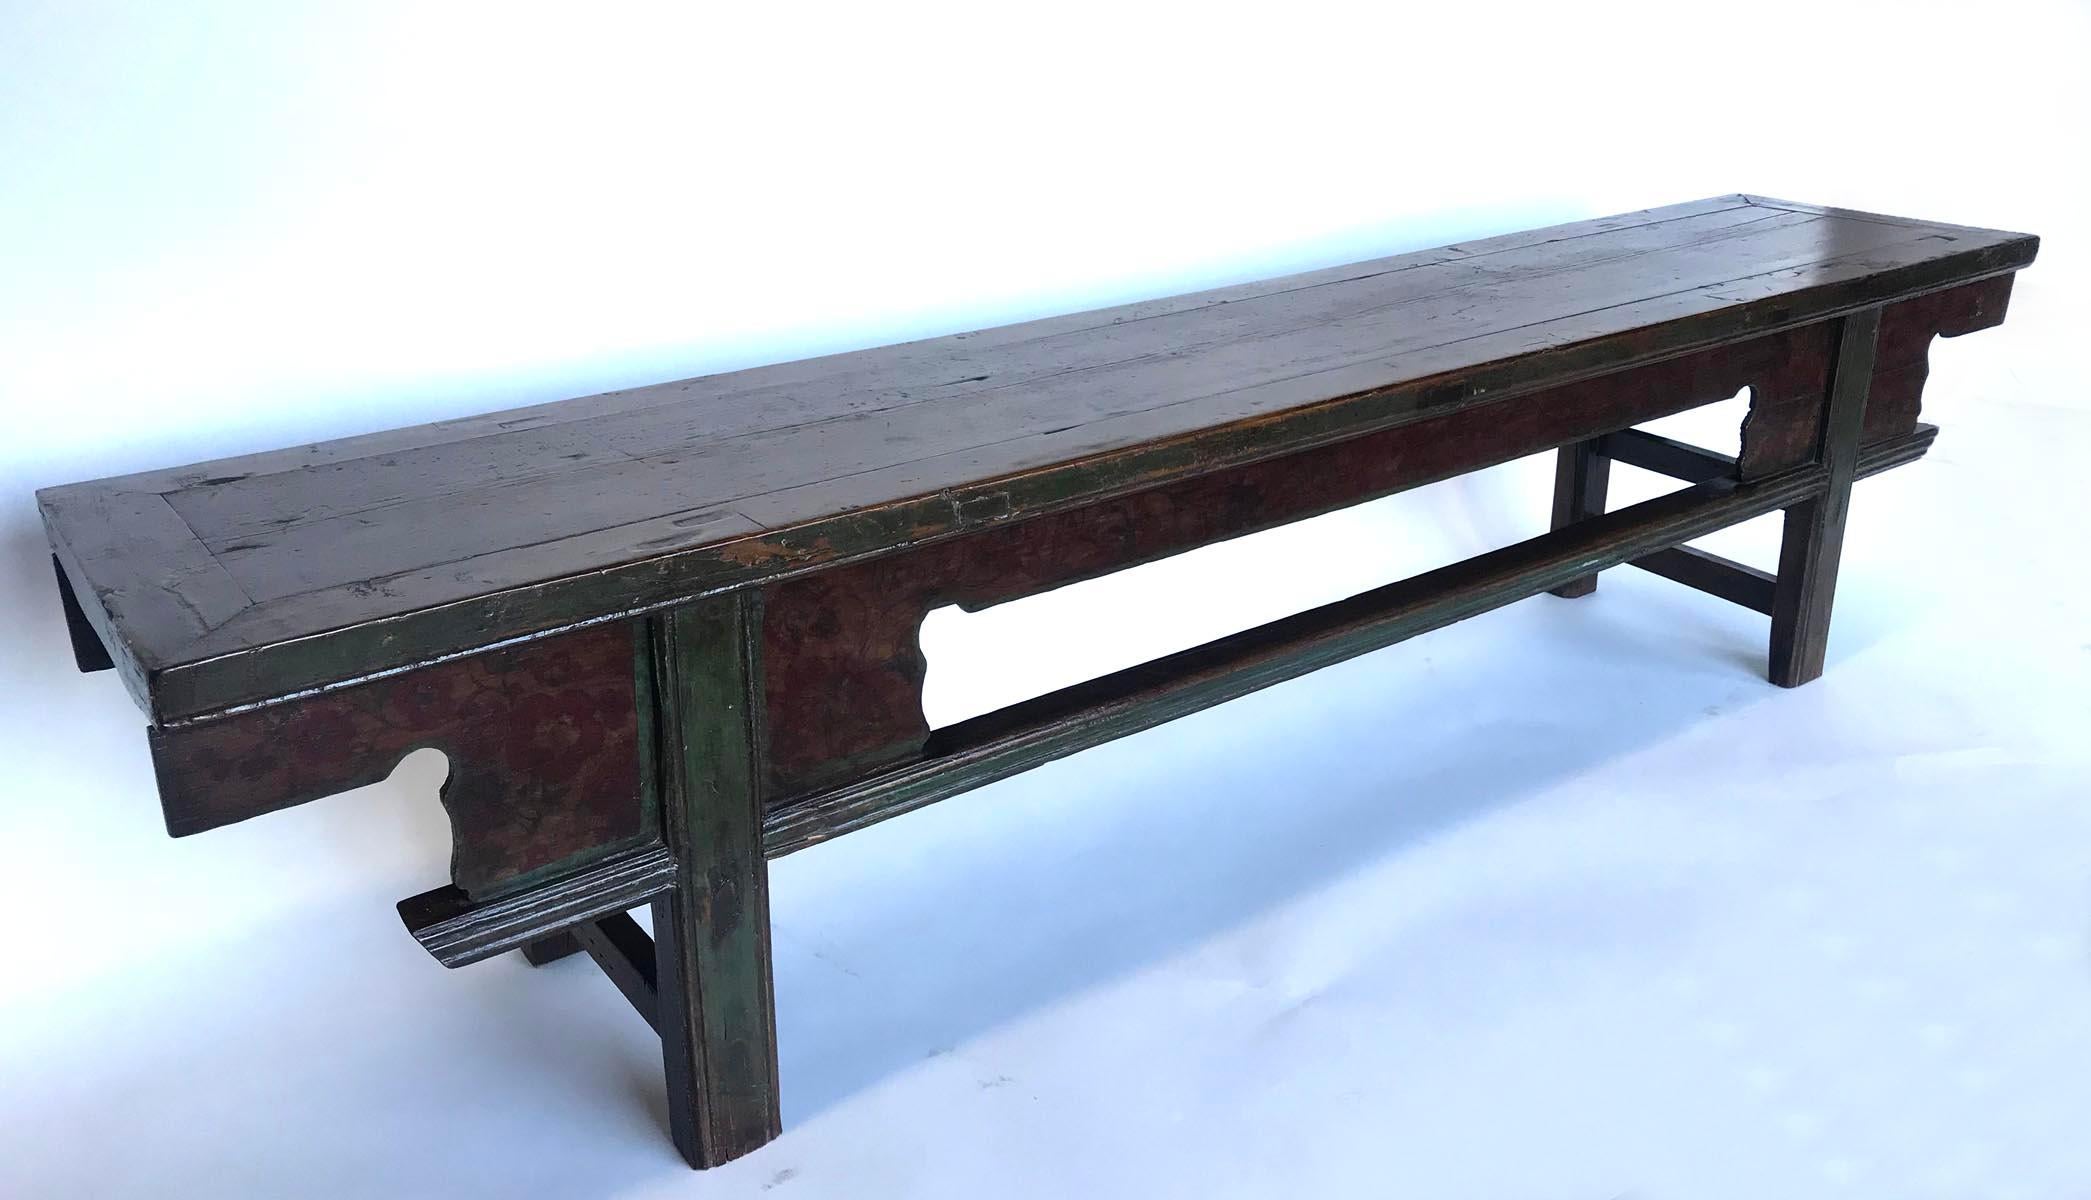 Old Chinese long elm bench with geometric multiple stretchers. Seat is framed. Some old green paint and faded barely visible red flowers on one long side of the bench. A handsome piece. Solid and functional.